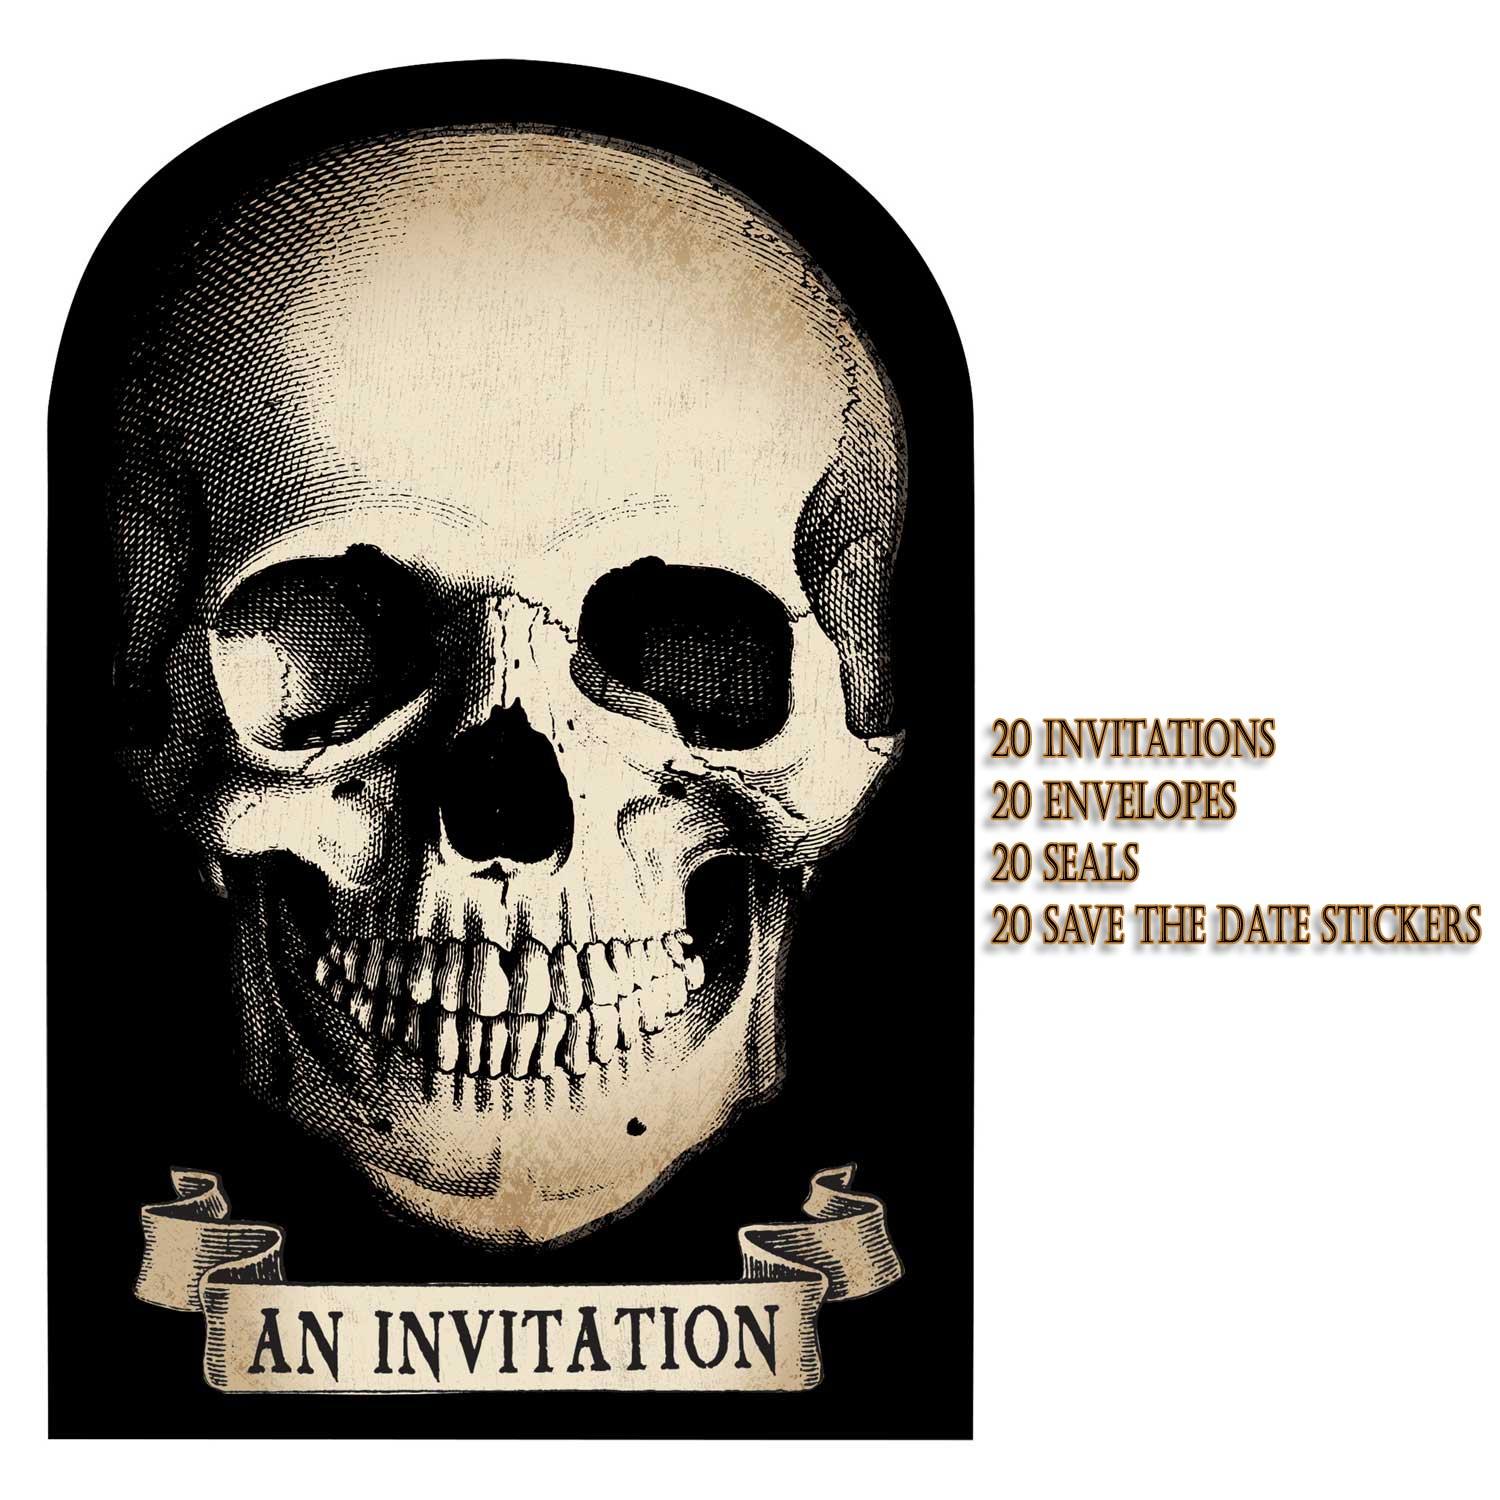 Boneyard Halloween Party Invitations Pack - 20 complete party invites by Amscan 791346 available here at Karnival Costumes online Halloween partry shop